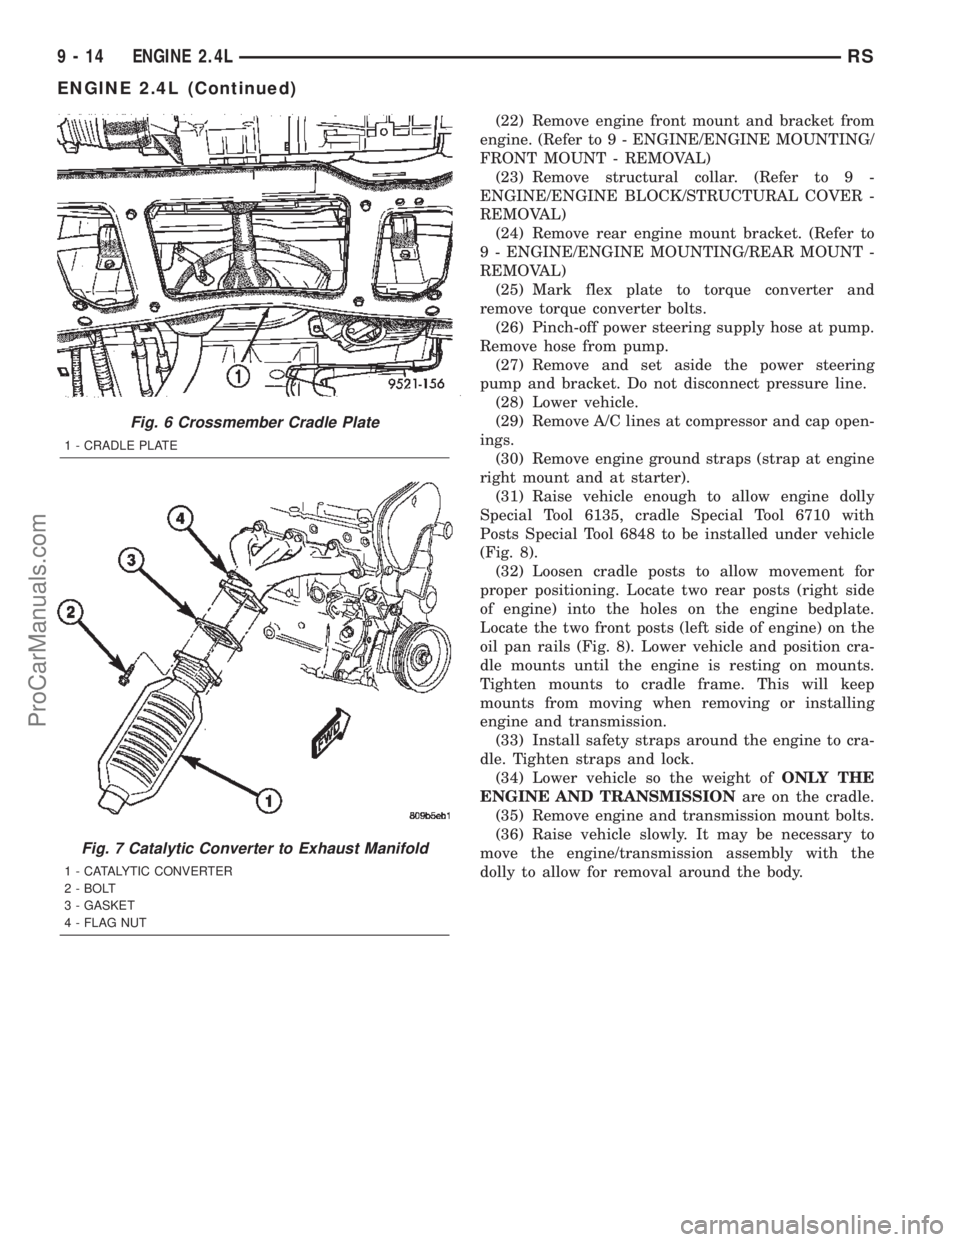 CHRYSLER VOYAGER 2002  Service Manual (22) Remove engine front mount and bracket from
engine. (Refer to 9 - ENGINE/ENGINE MOUNTING/
FRONT MOUNT - REMOVAL)
(23) Remove structural collar. (Refer to 9 -
ENGINE/ENGINE BLOCK/STRUCTURAL COVER -